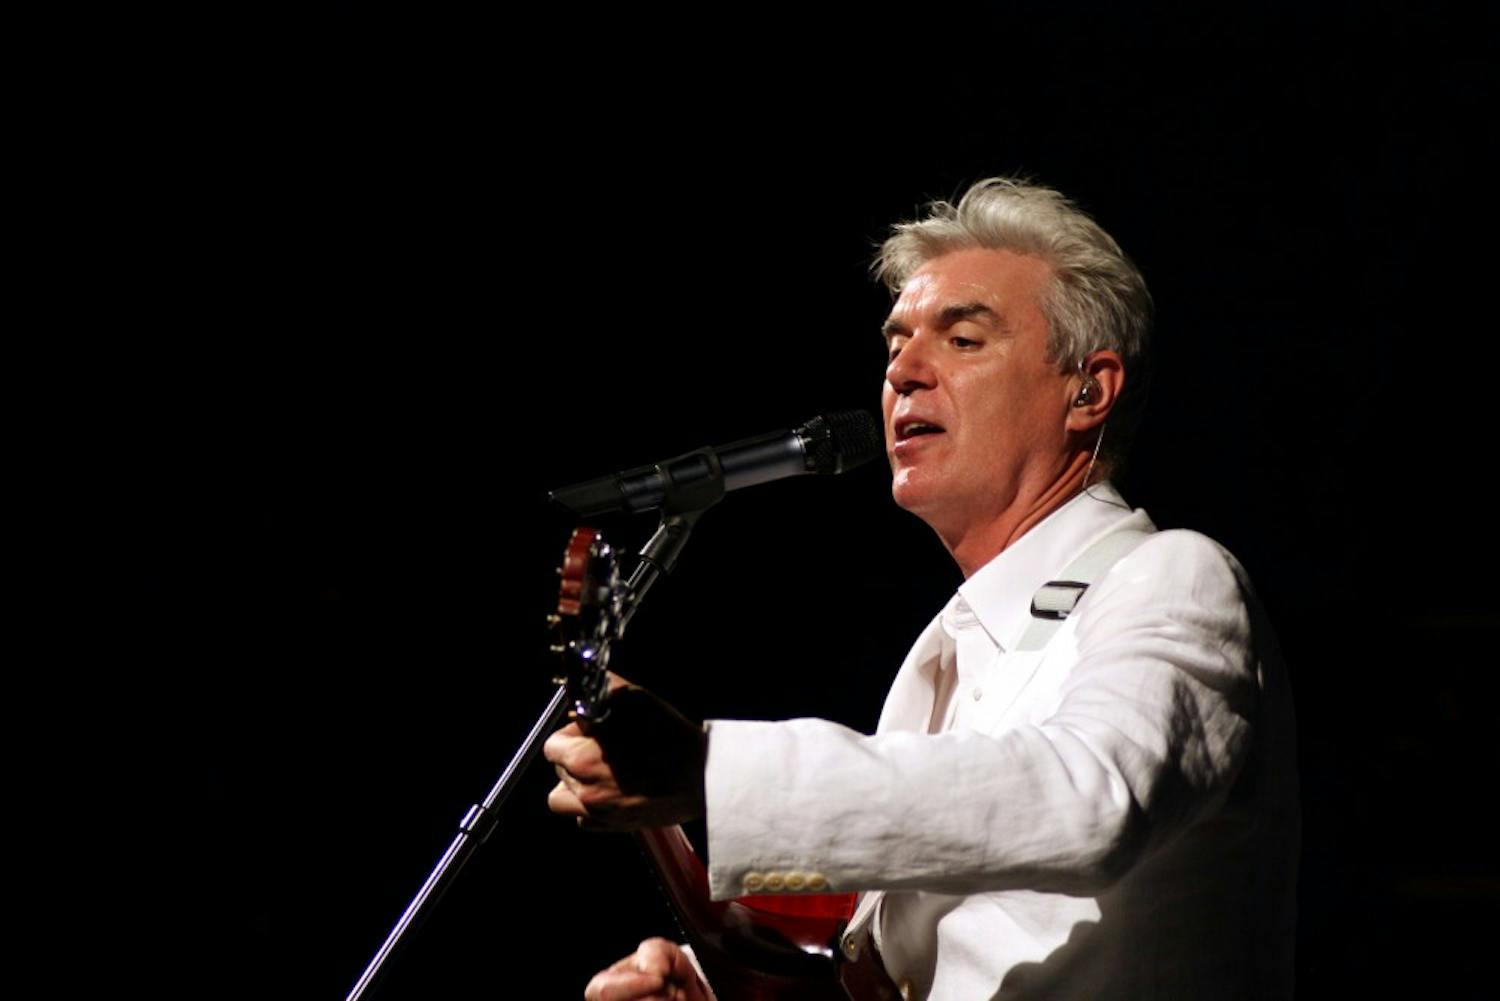 Former Talking Heads frontman David Byrne performed Tuesday night at the Center for the Arts. Byrne played classics from his seminal band as well as modern collaborations and a Janelle Monáe protest song. 